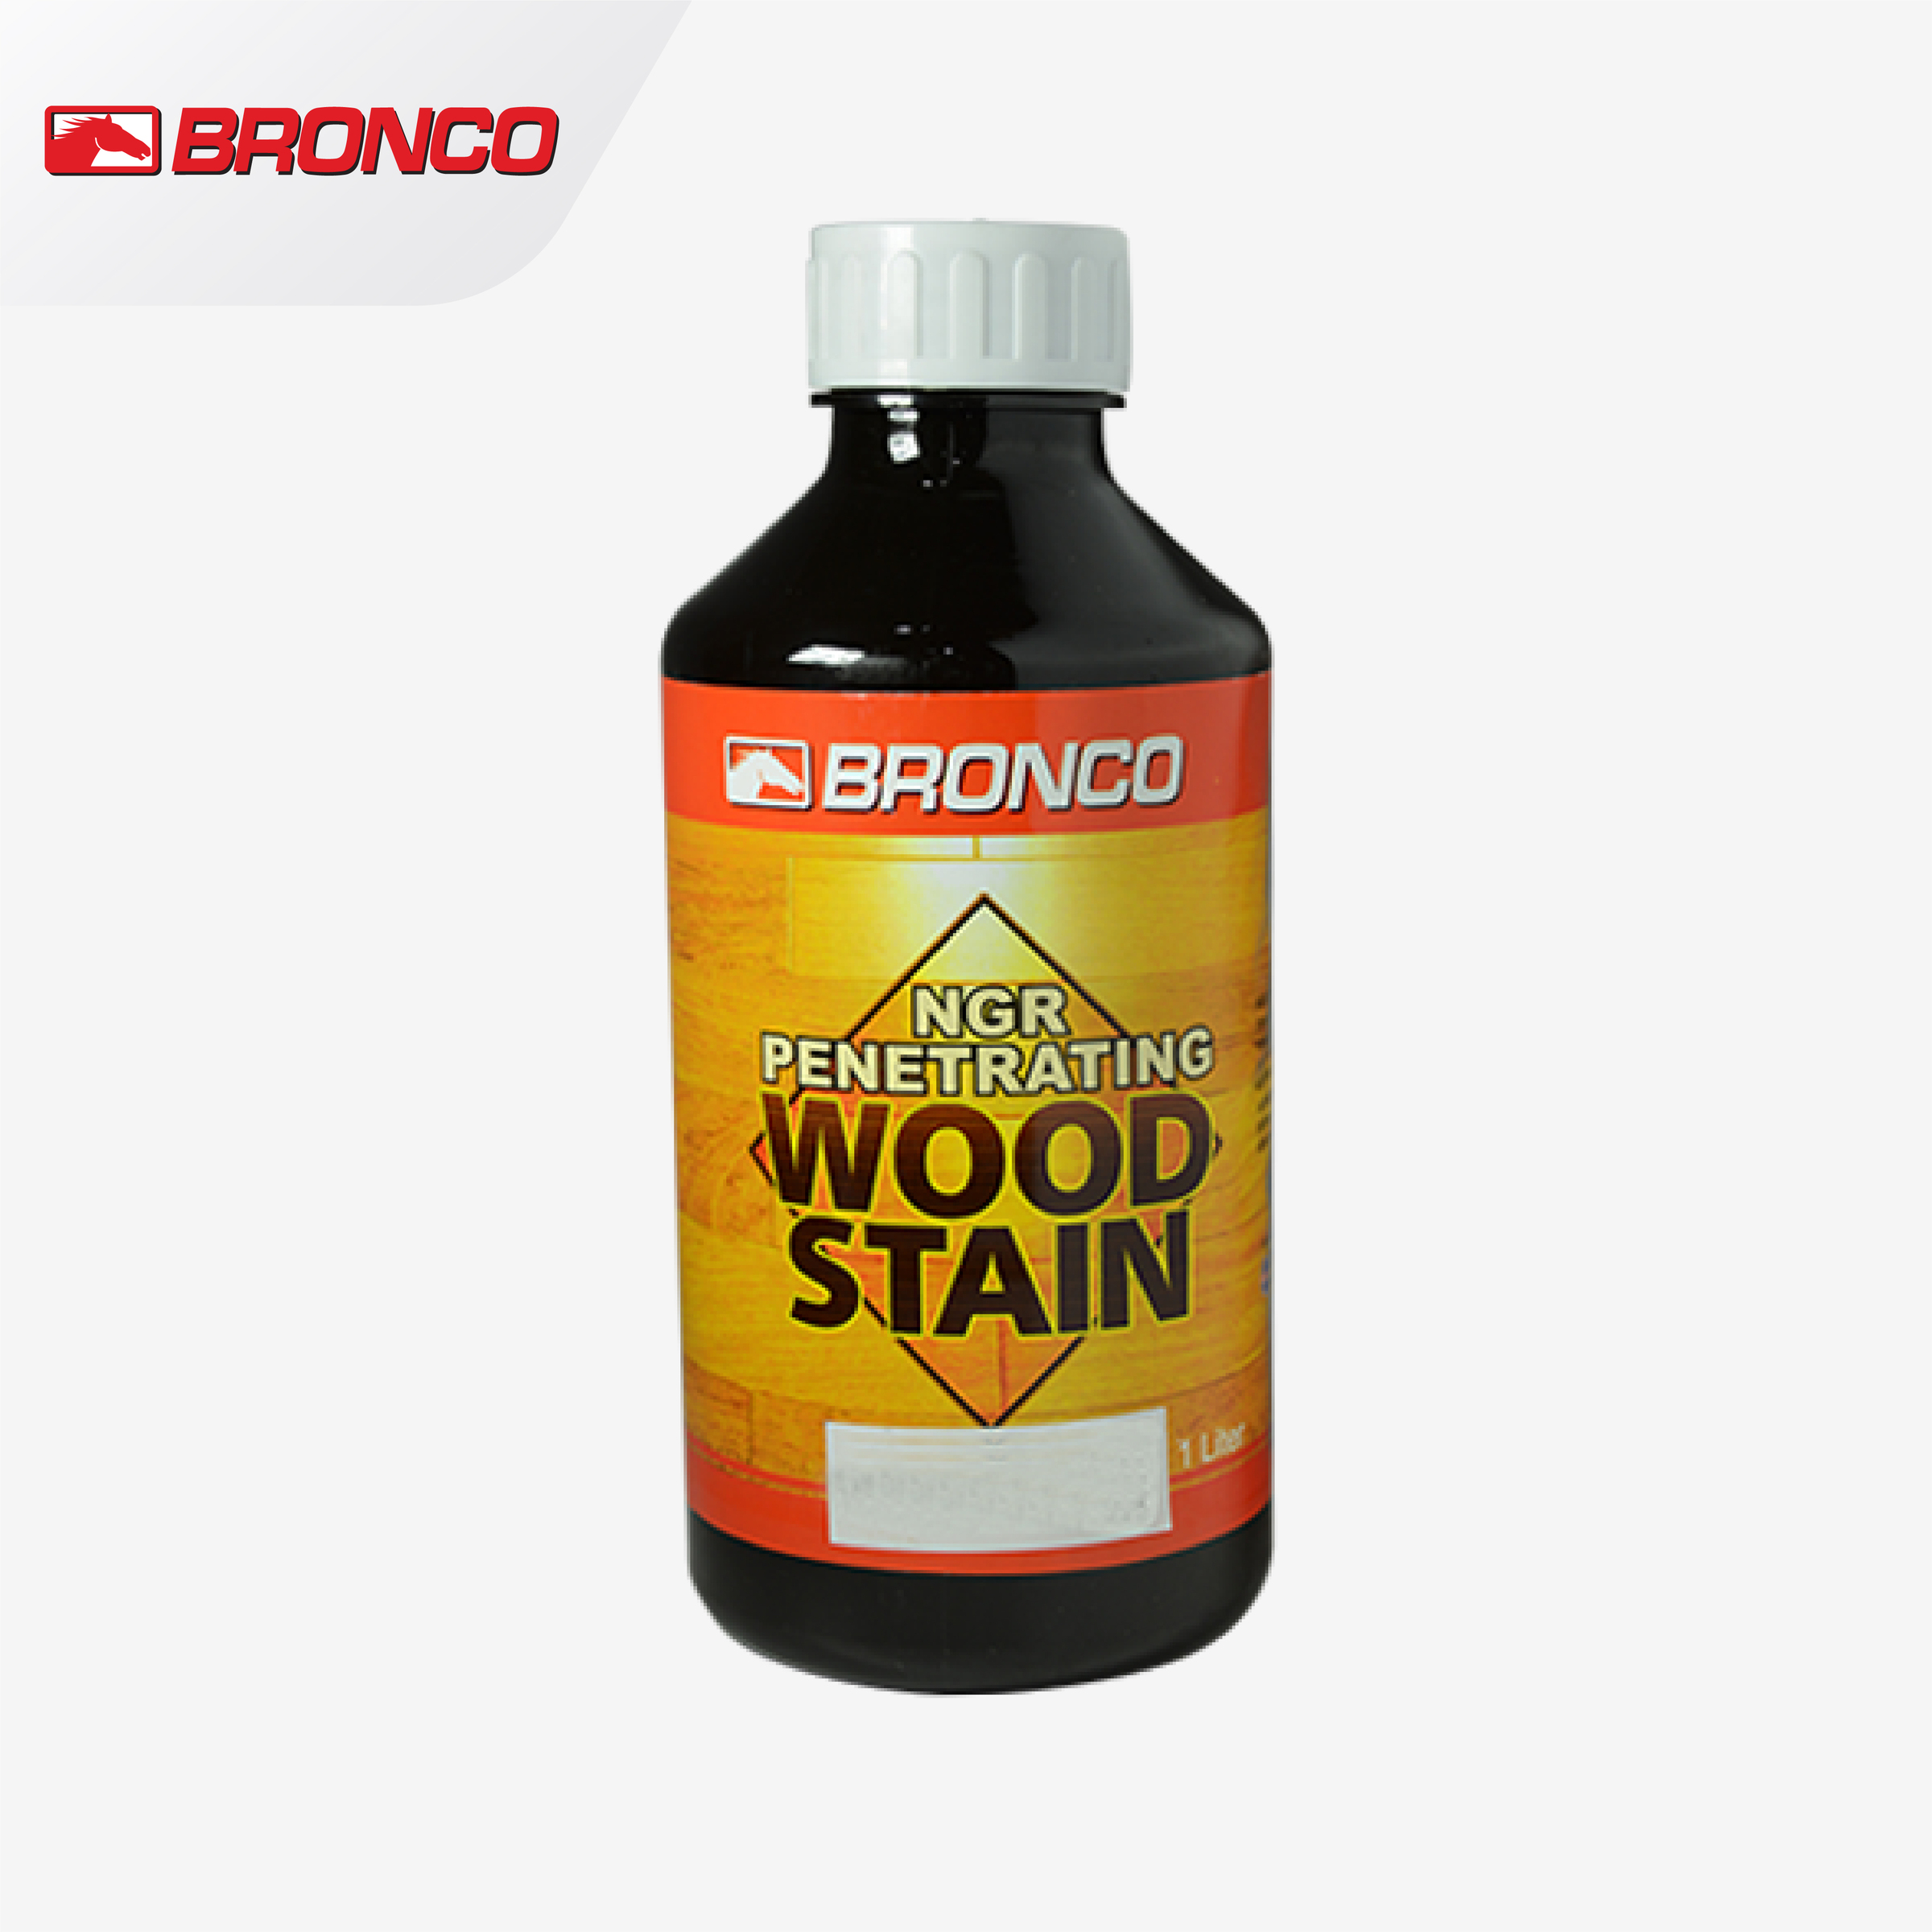 Bronco NGR Penetrating Wood Stain